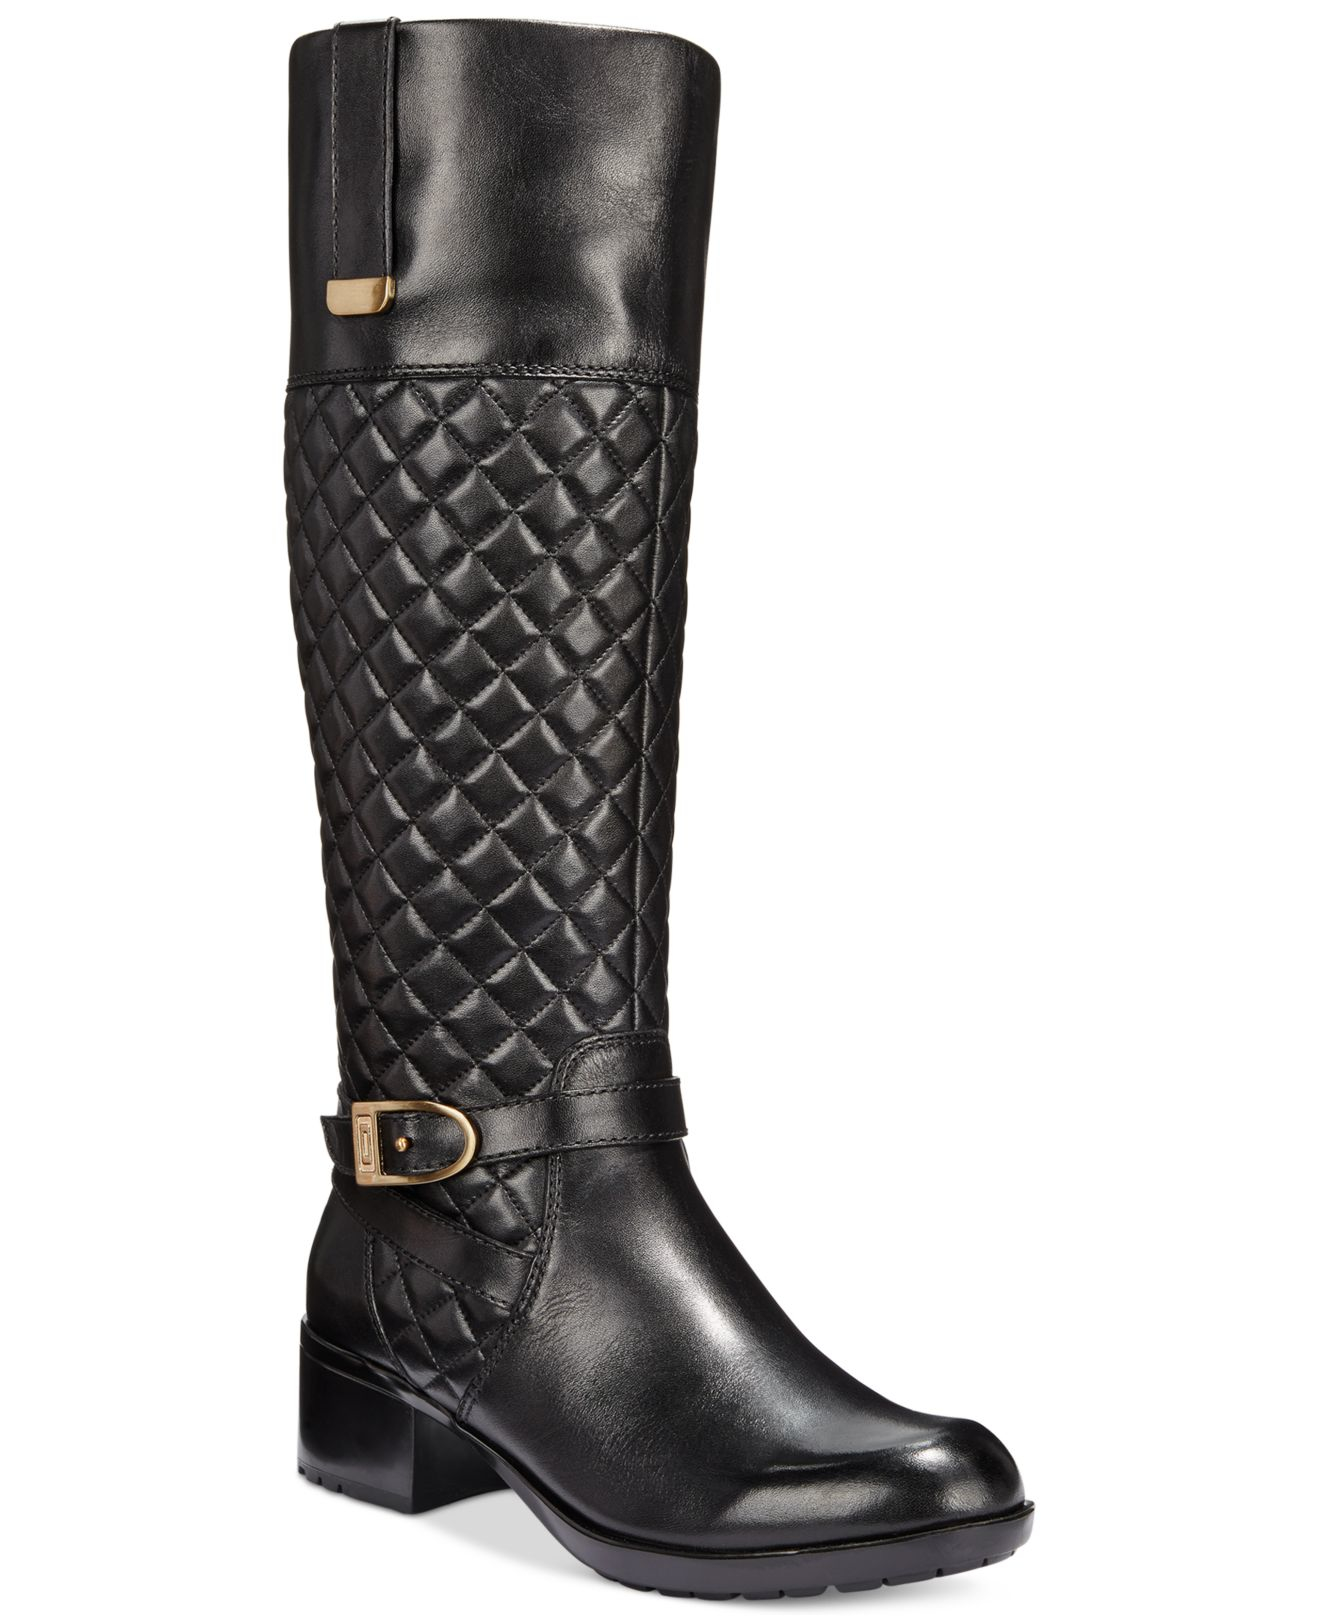 Lyst - Bandolino Blushe Quilted Wide Calf Riding Boots in Black